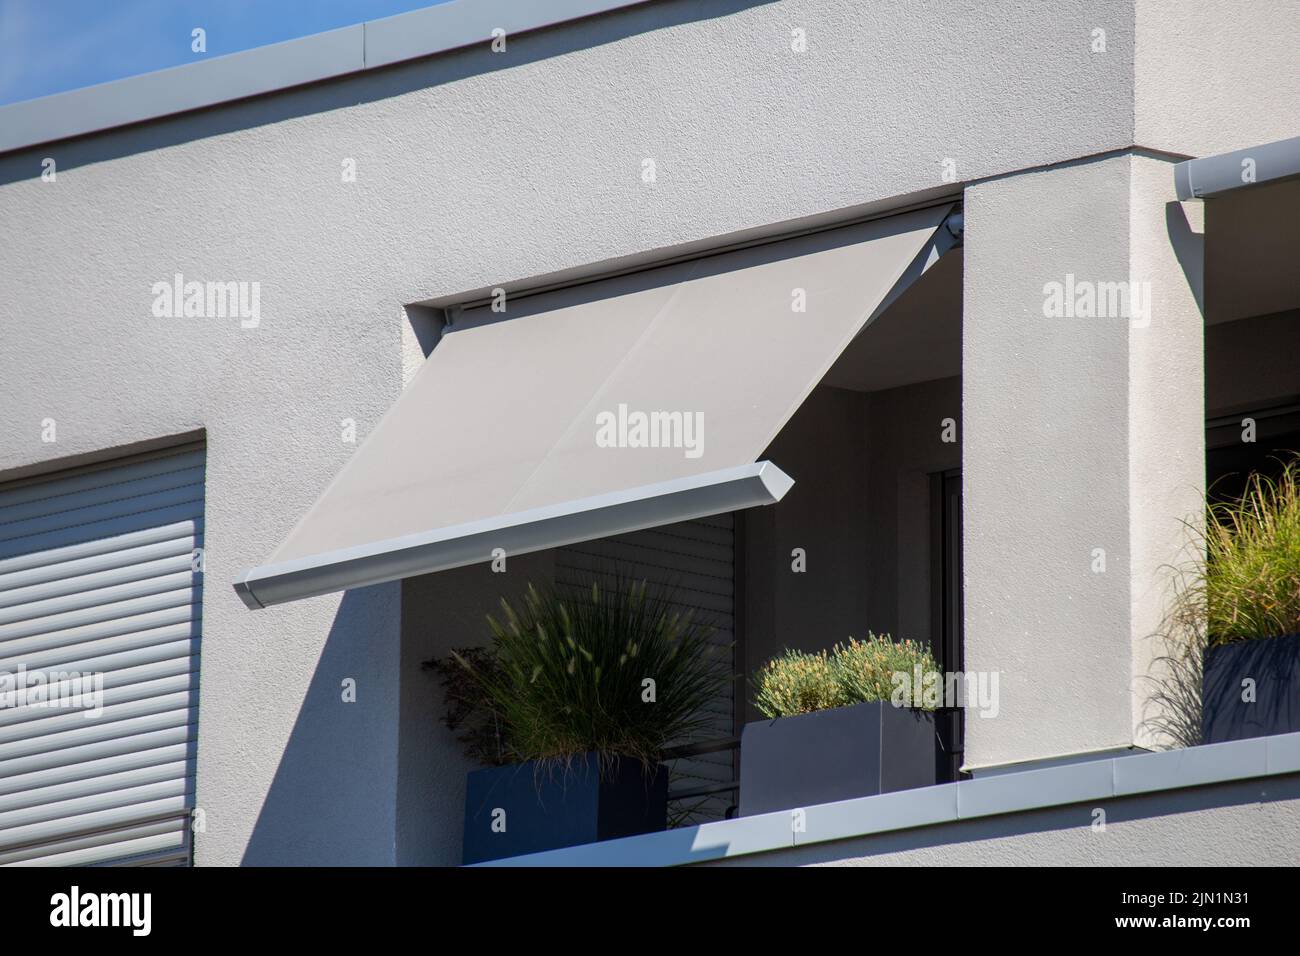 New and high-quality balcony awning Stock Photo